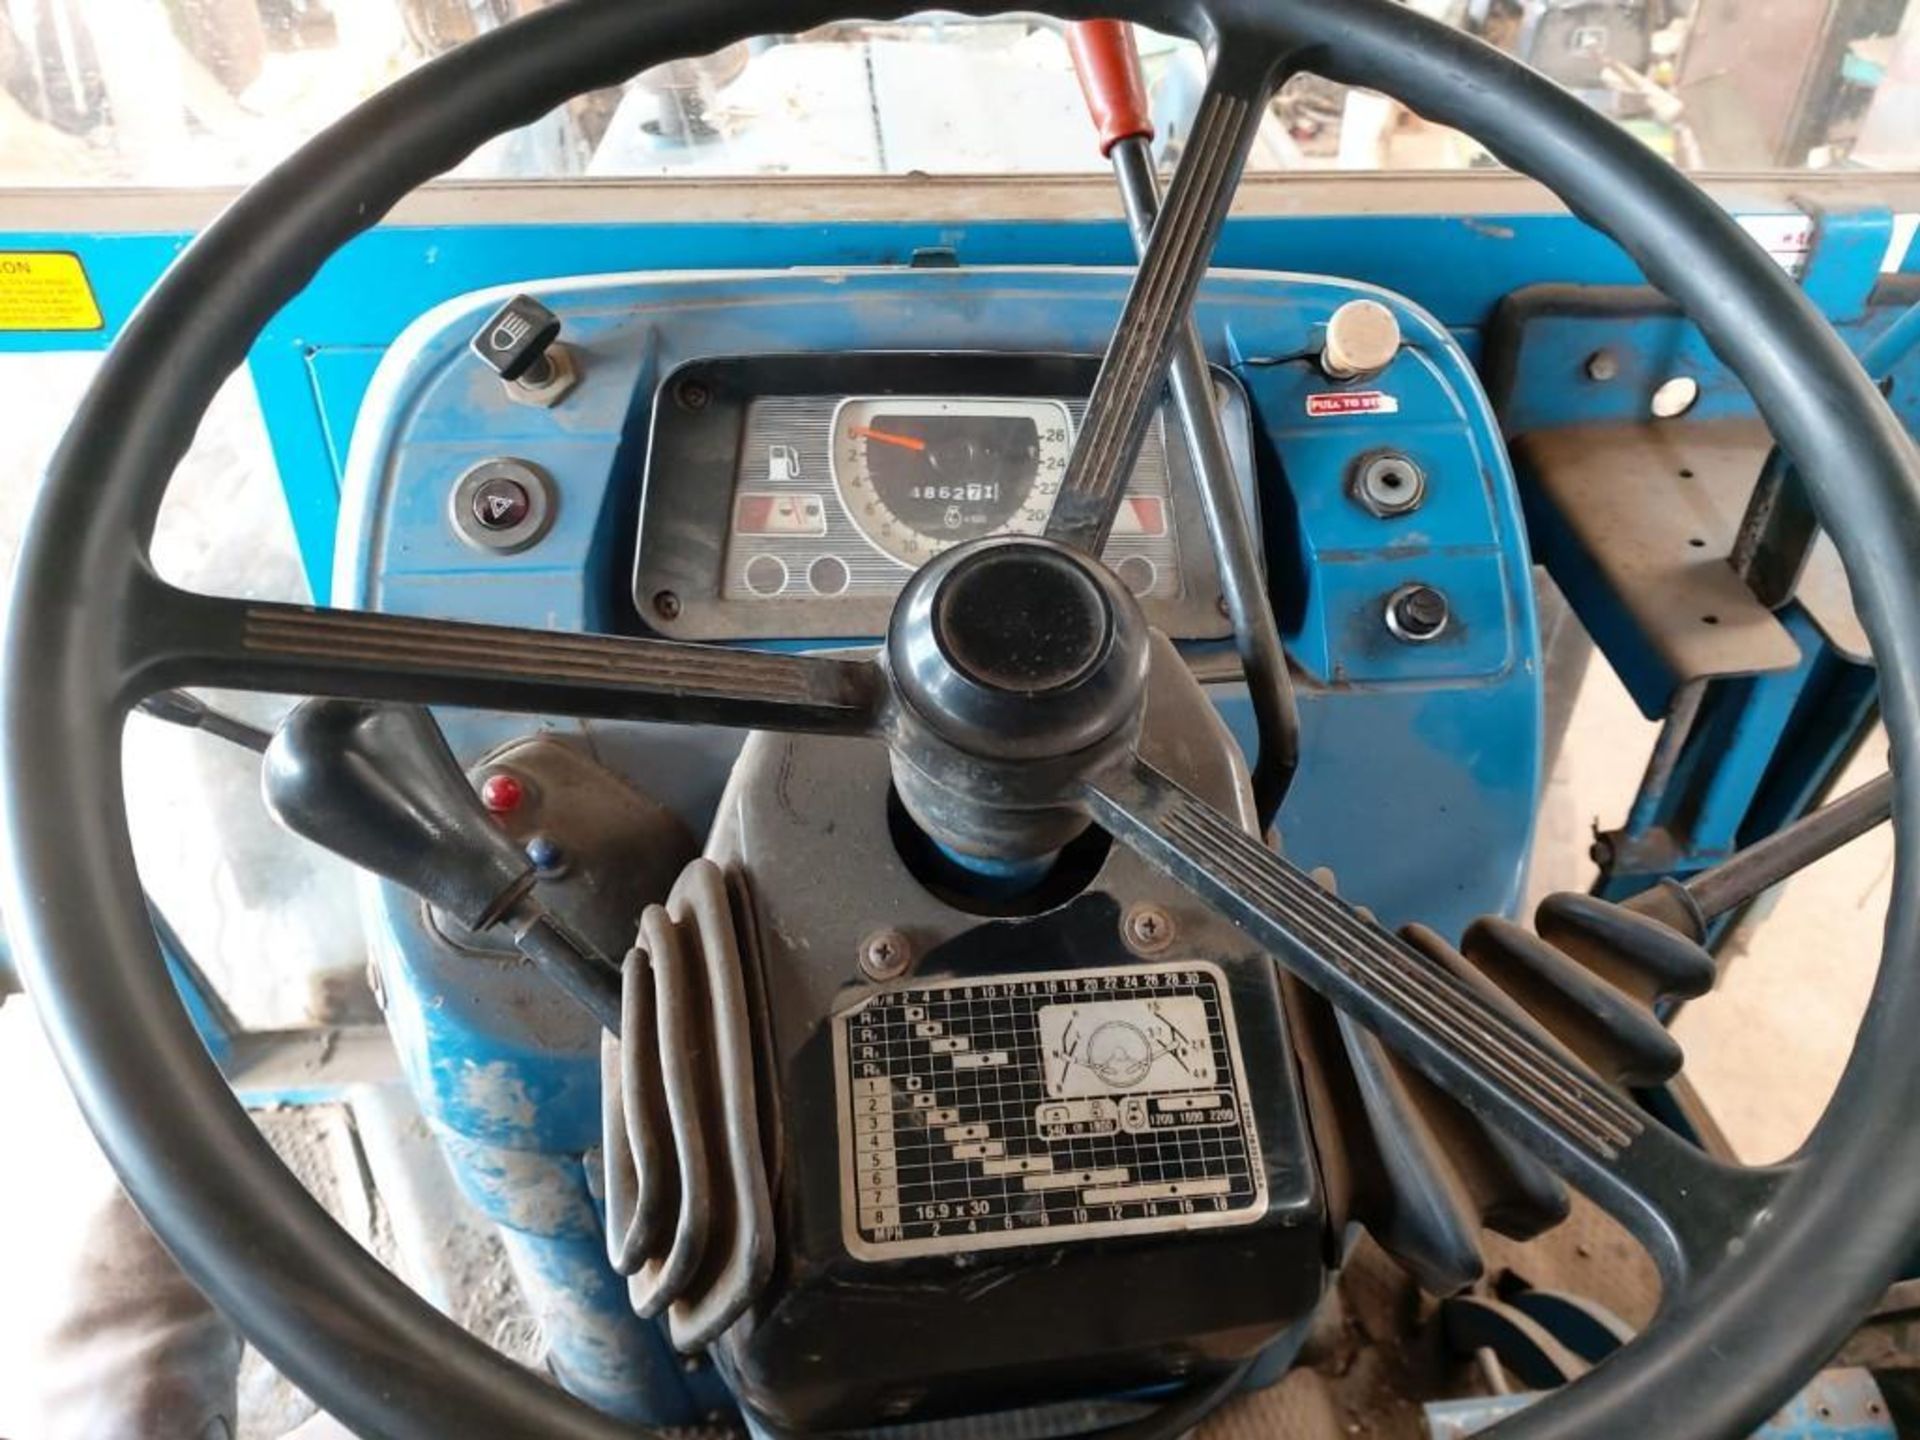 1983 Ford 4610 with Loader - Image 8 of 10